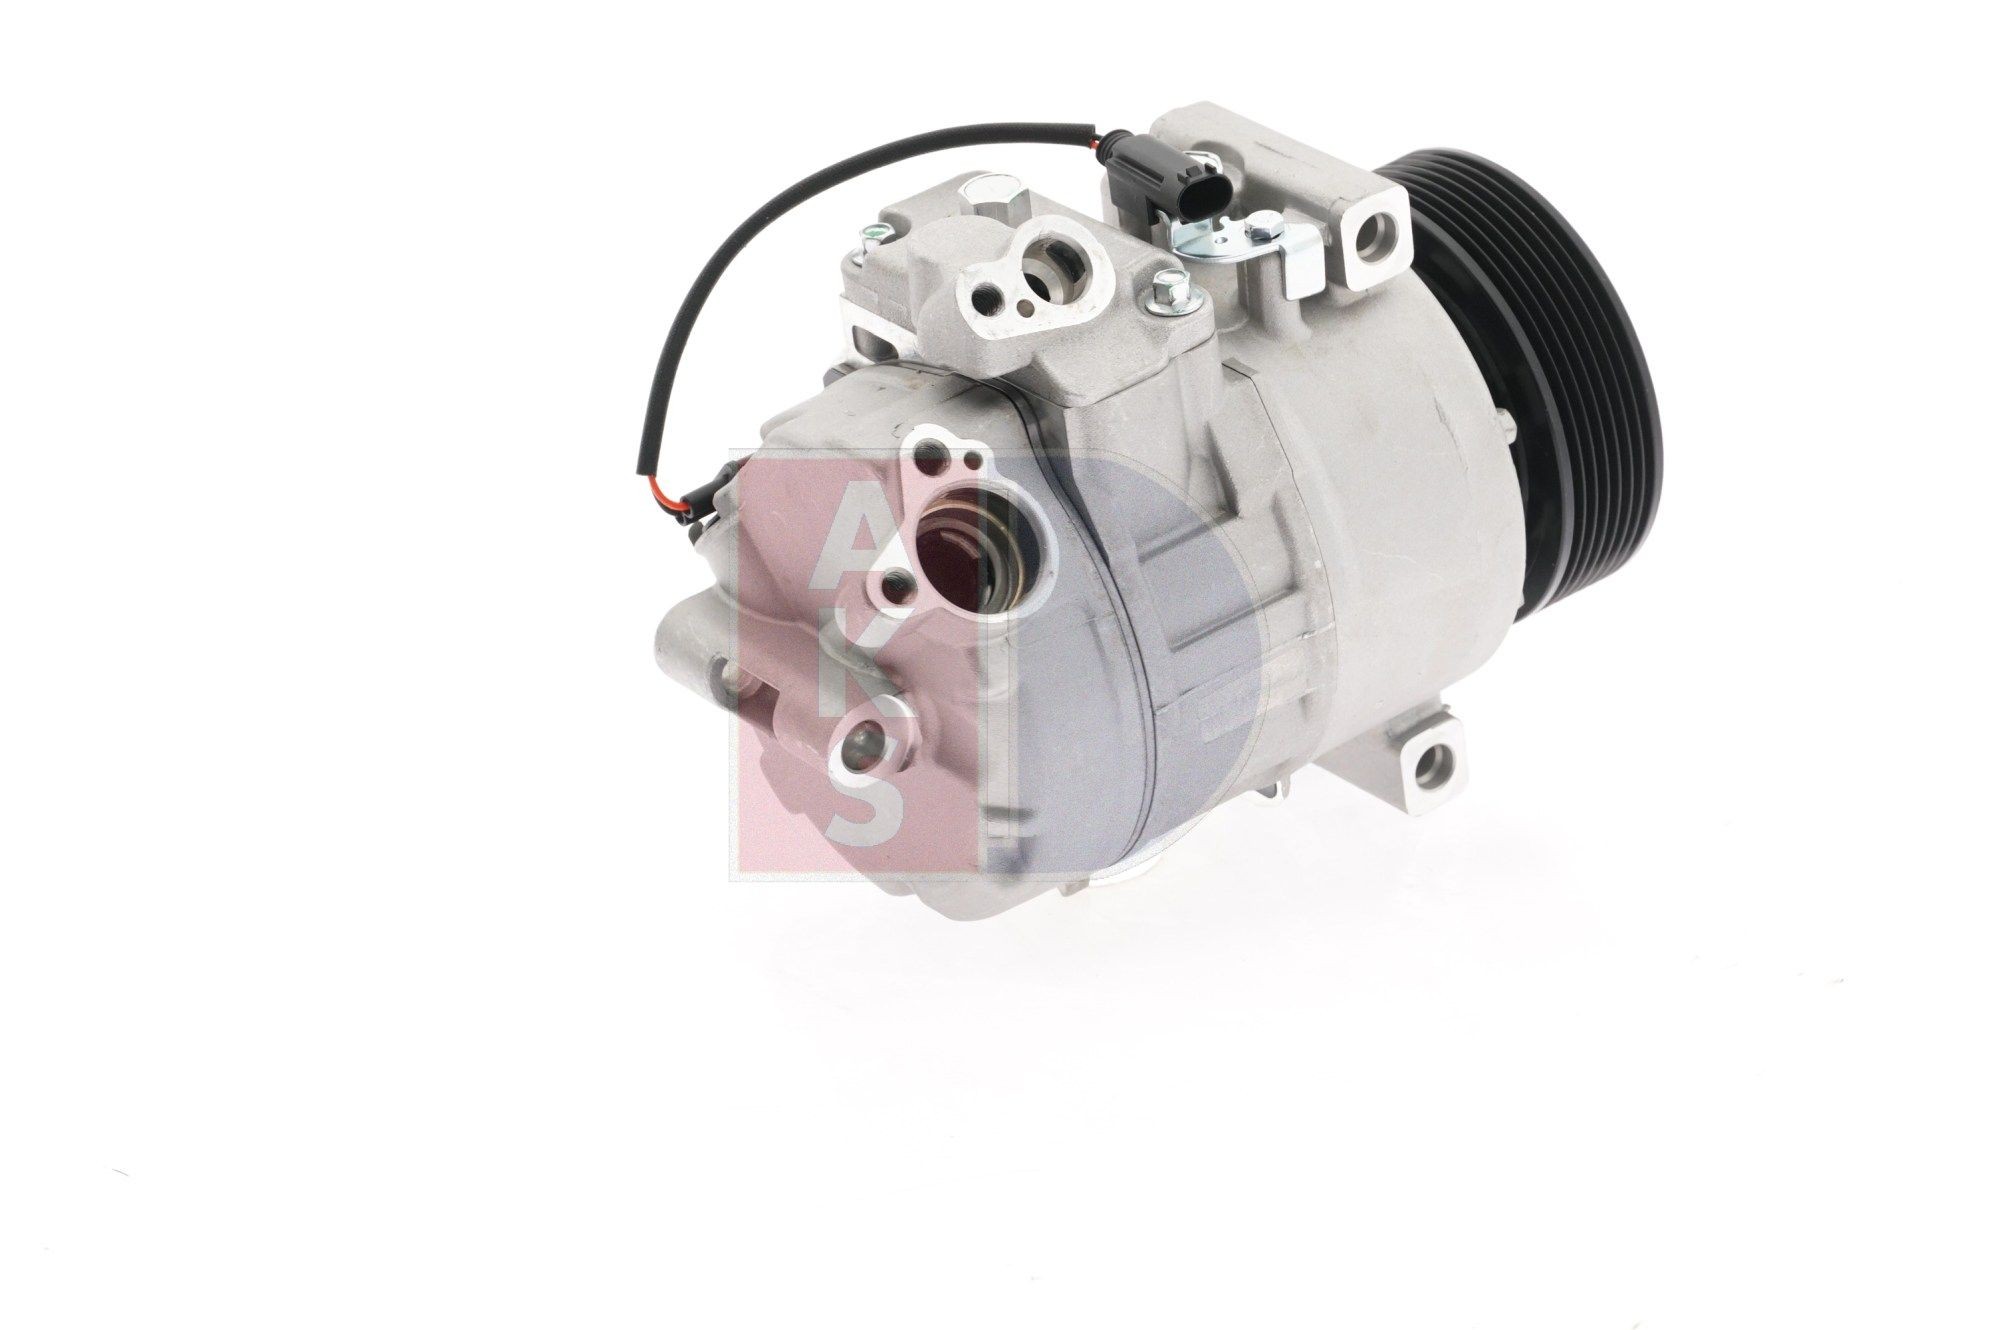 Air conditioning compressor 851806N from AKS DASIS